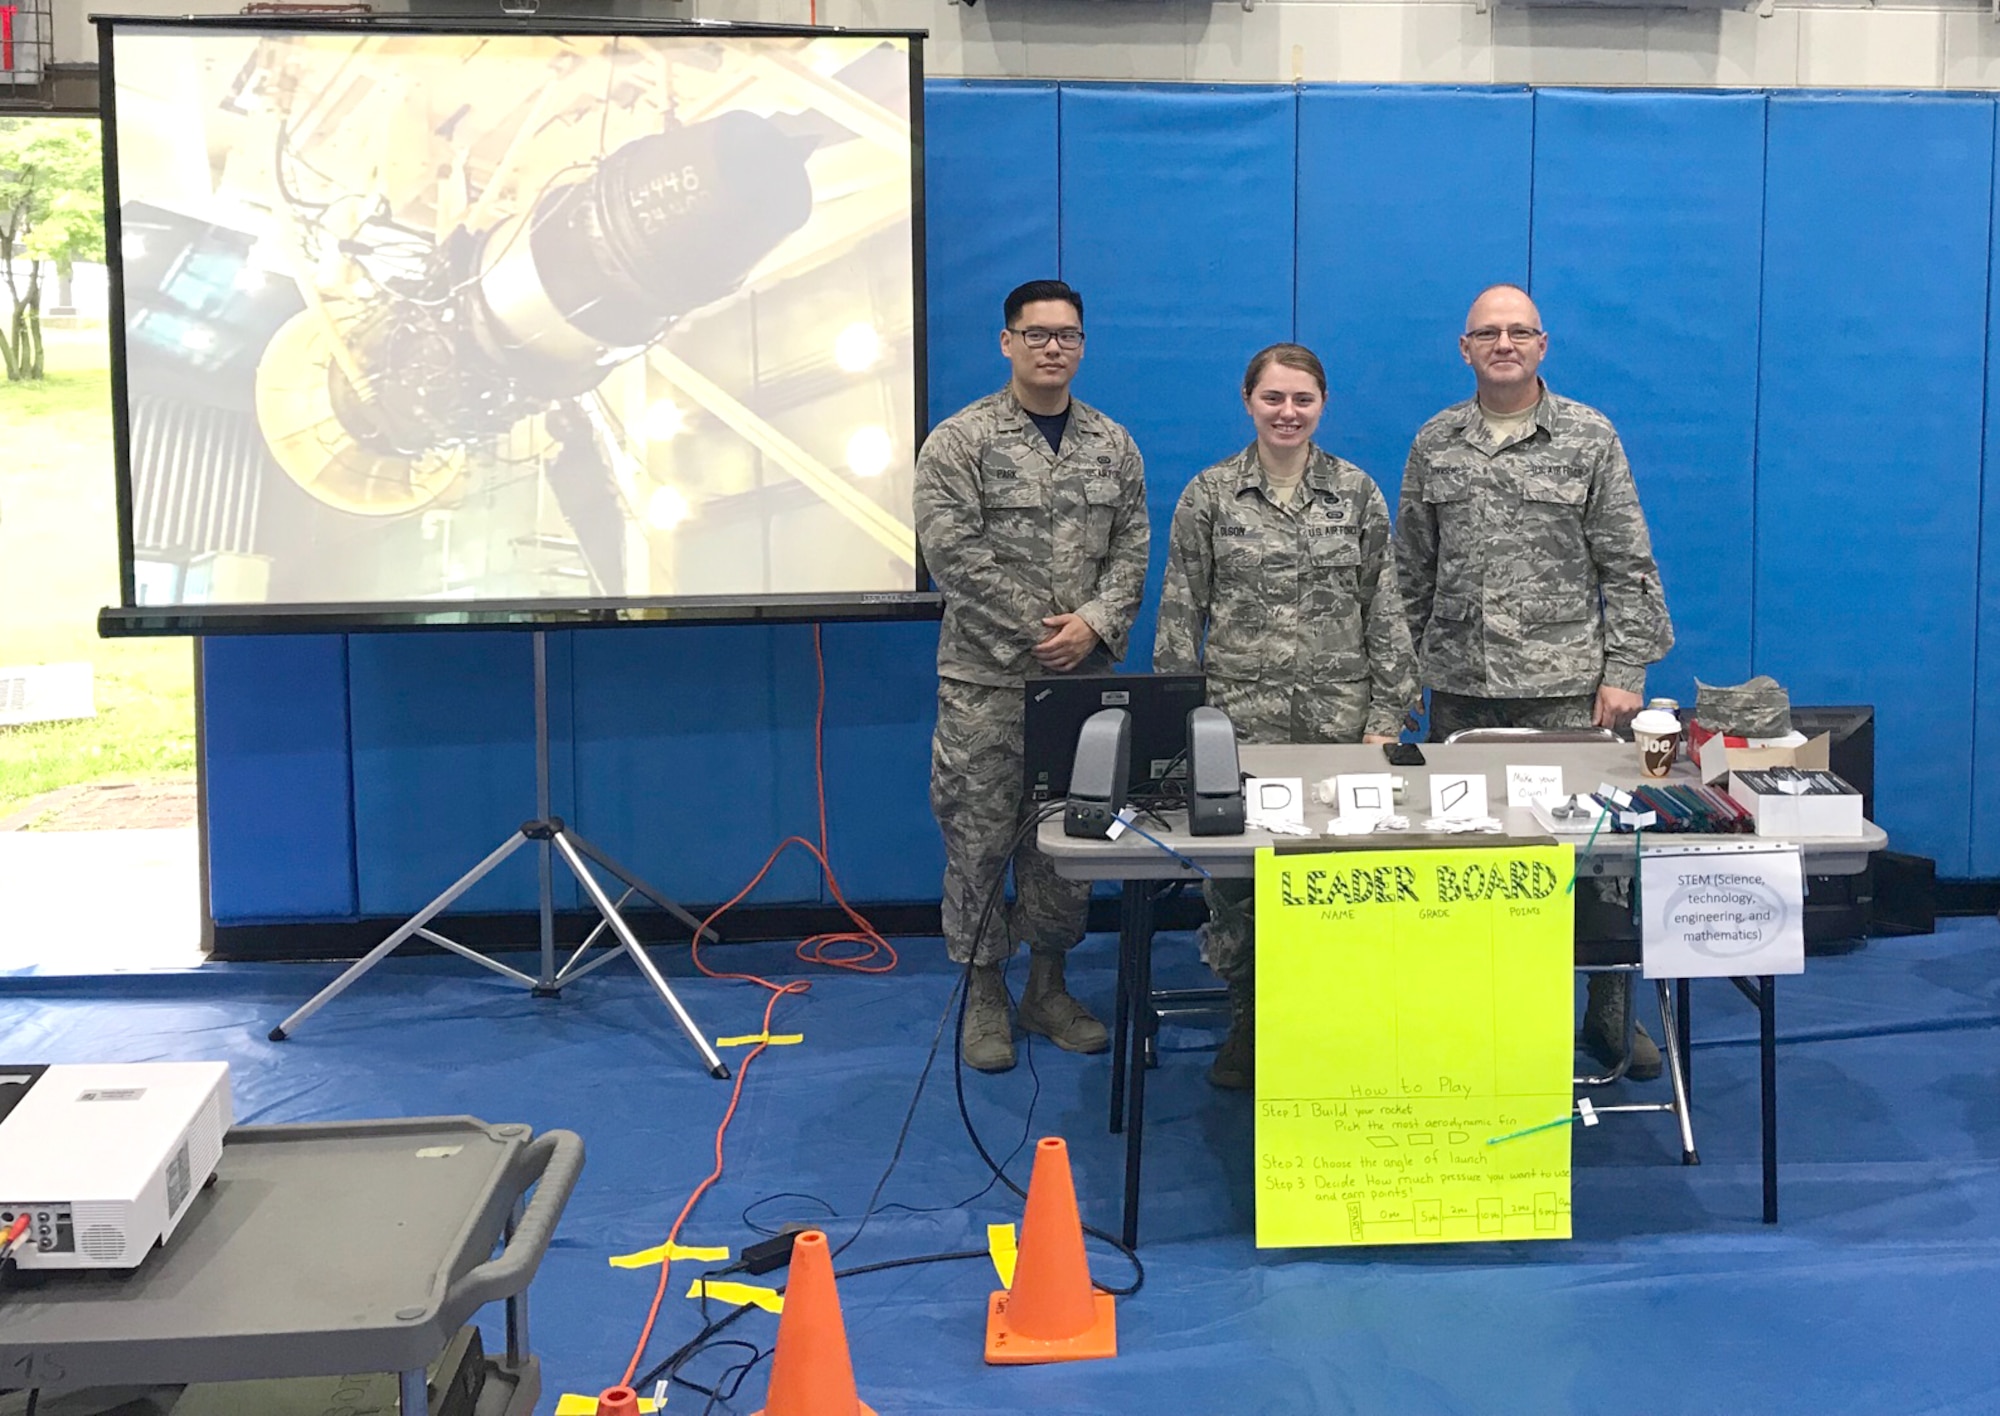 2nd Lt. Jimyung Park, 2nd Lt. Ashley Olson, Senior Master Sgt. Darrell Townsend man their booth at the Osan Science, Technology, Engineering and Mathematics (STEM) Career Day held for students of military families at the base in South Korea. As part of the STEM event, Townsend, who is a craft superintendent at Arnold Air Force Base in addition to serving in the Tennessee Air National Guard, helped demonstrate how to launch straw rockets. The materials for the demonstration were provided by Olga Oakley, Air Force STEM director at Hands-On Science Center. (Courtesy photo)